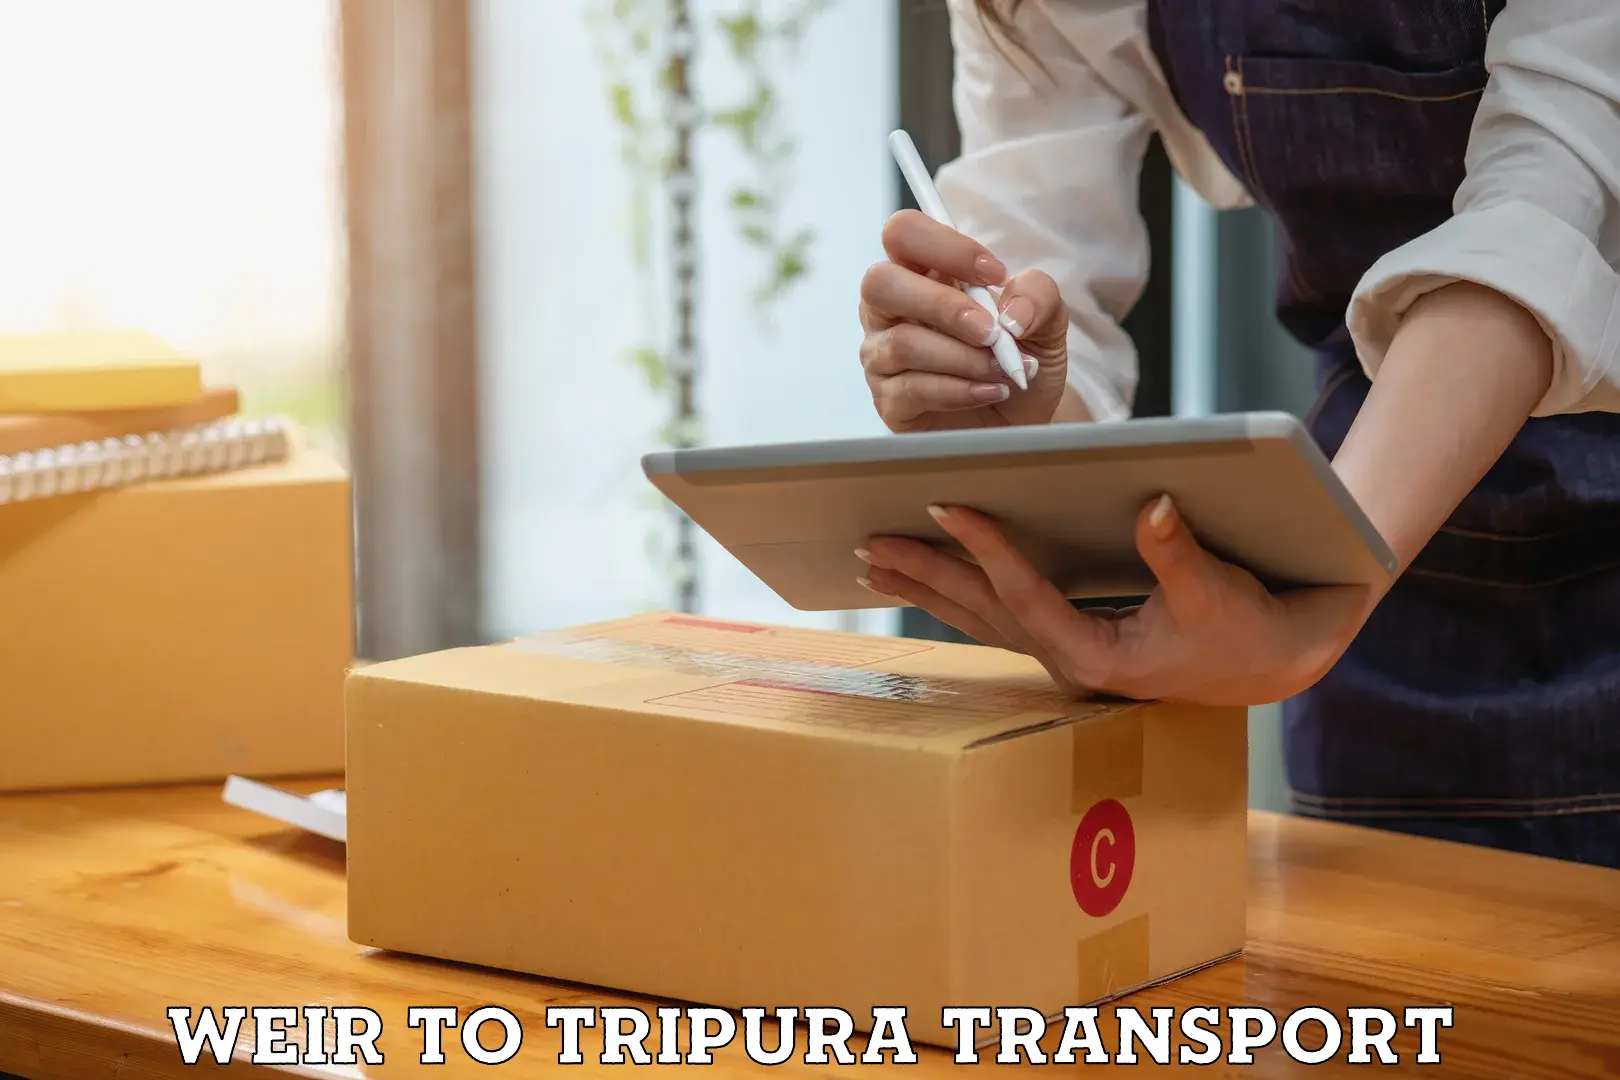 Transport shared services Weir to Tripura